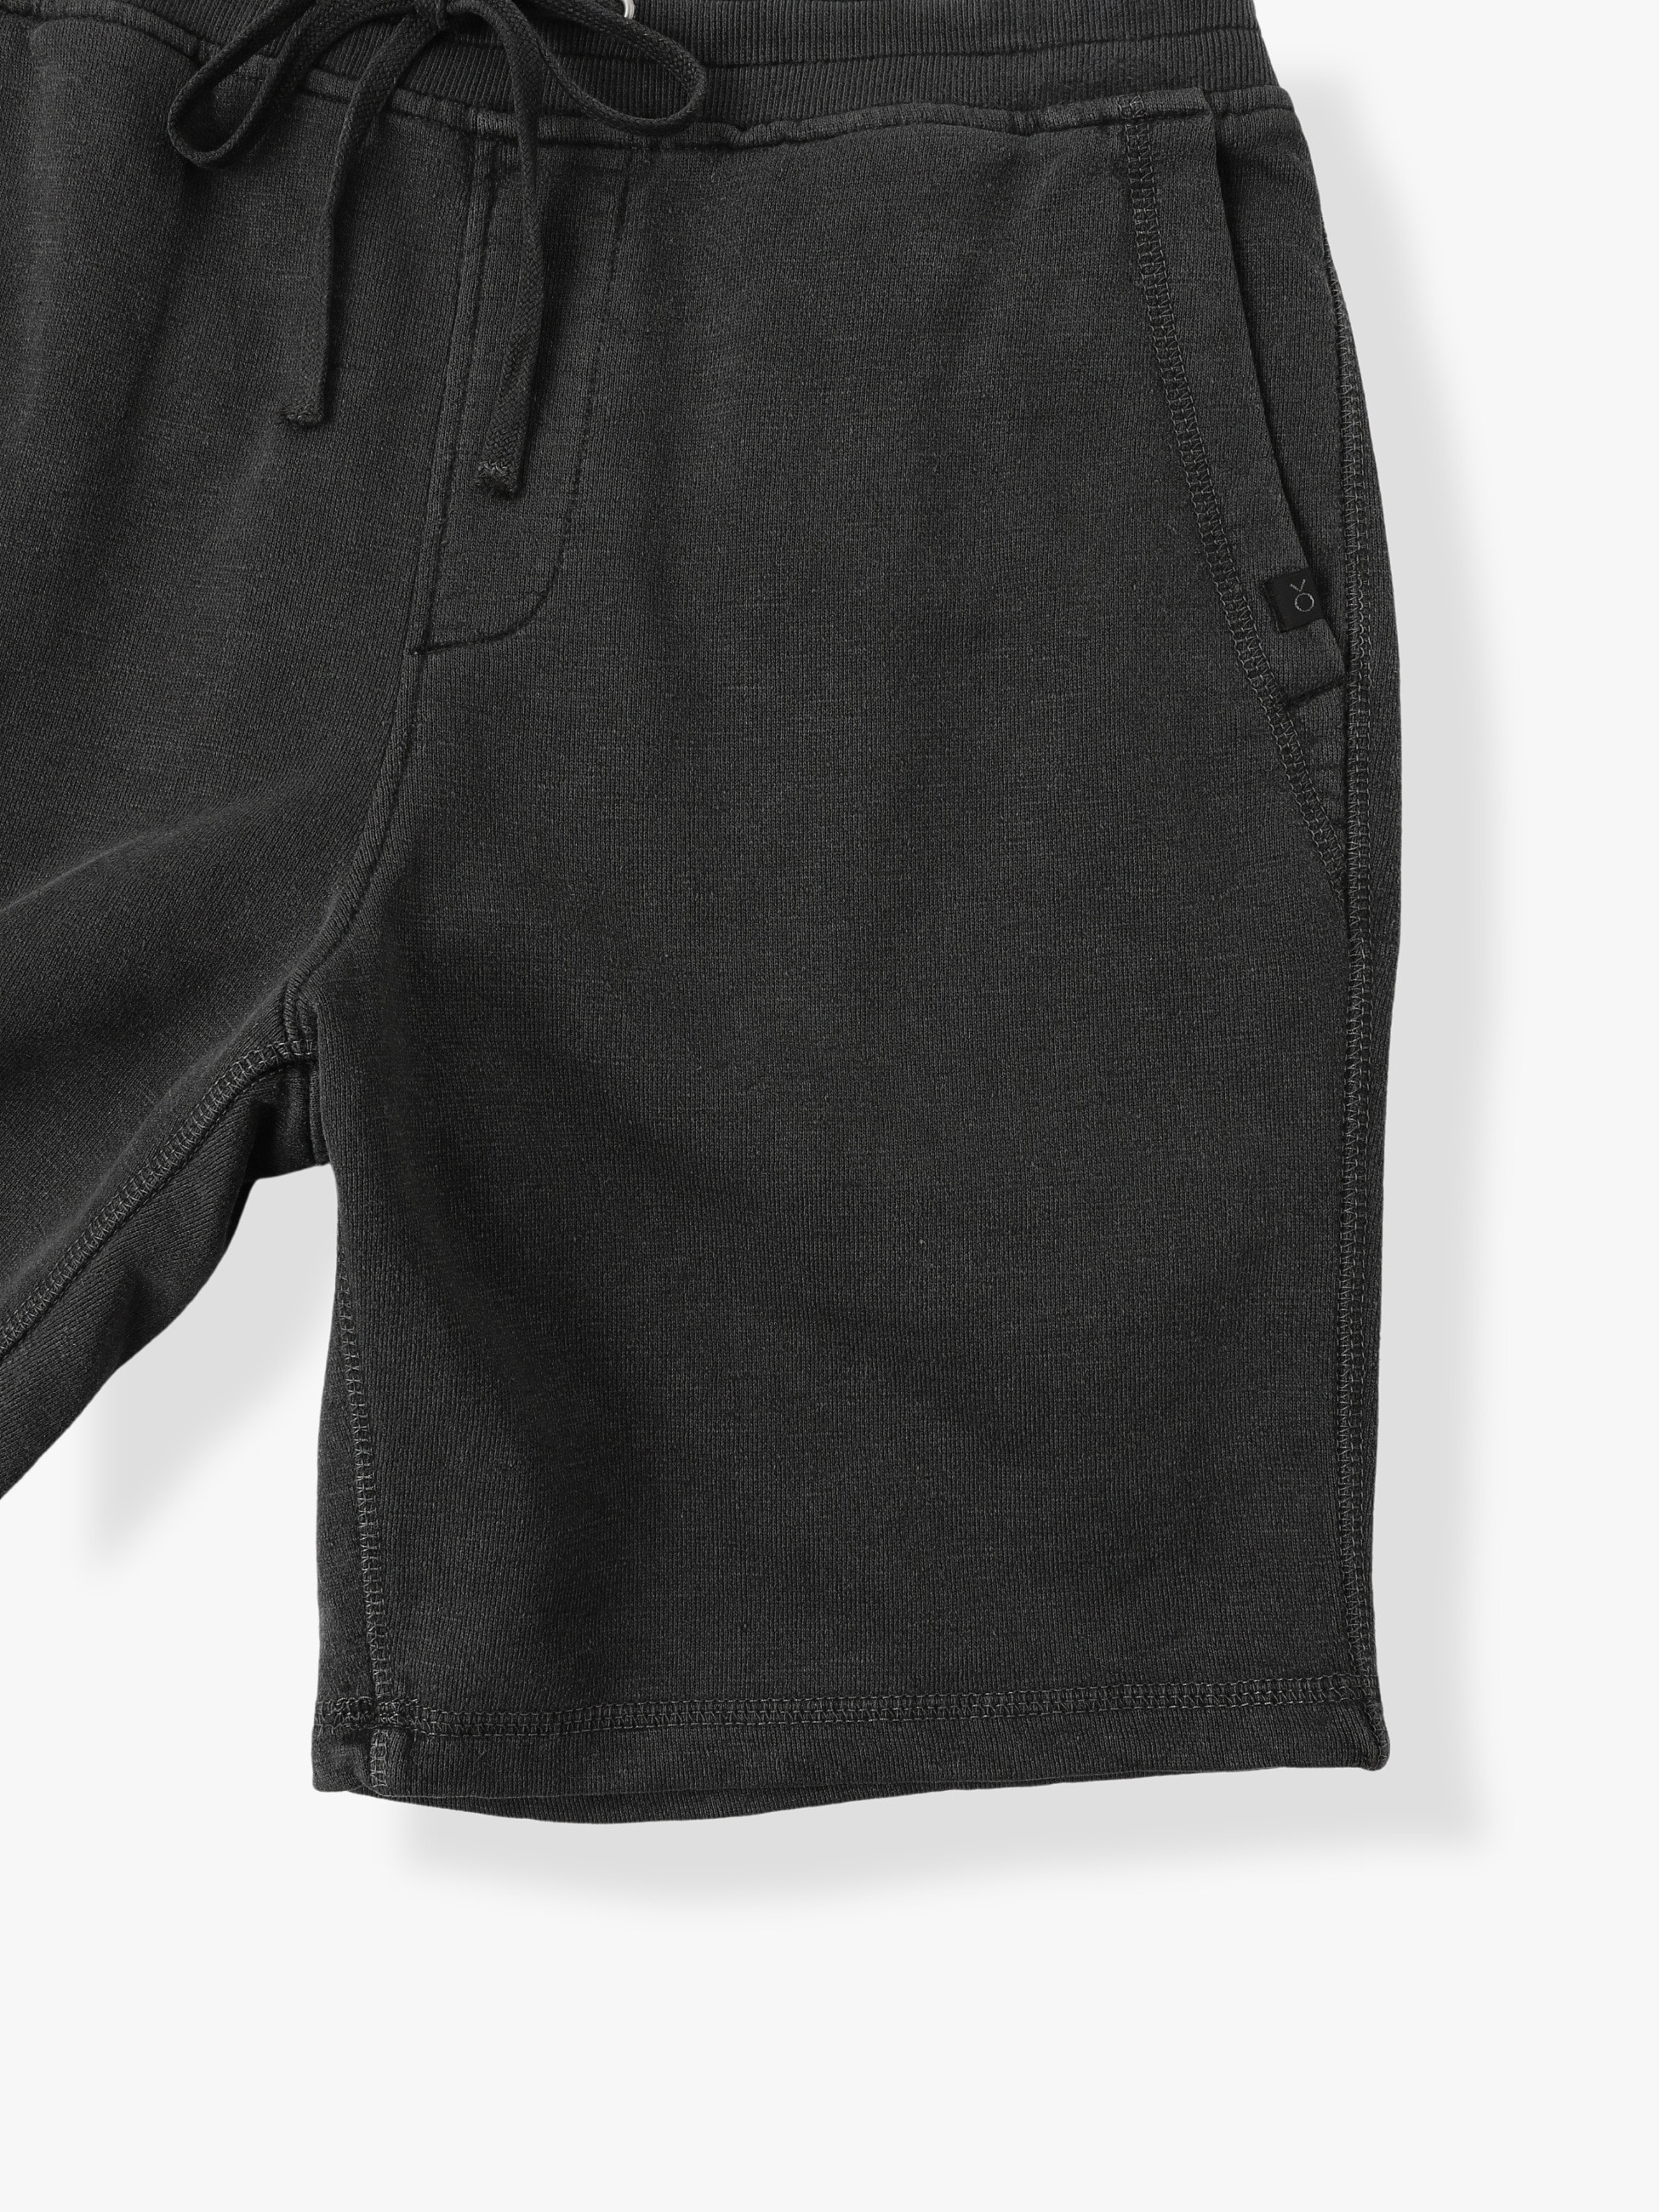 Sur Sweat Shorts (charcoal gray)｜OUTERKNOWN(アウターノウン)｜Ron